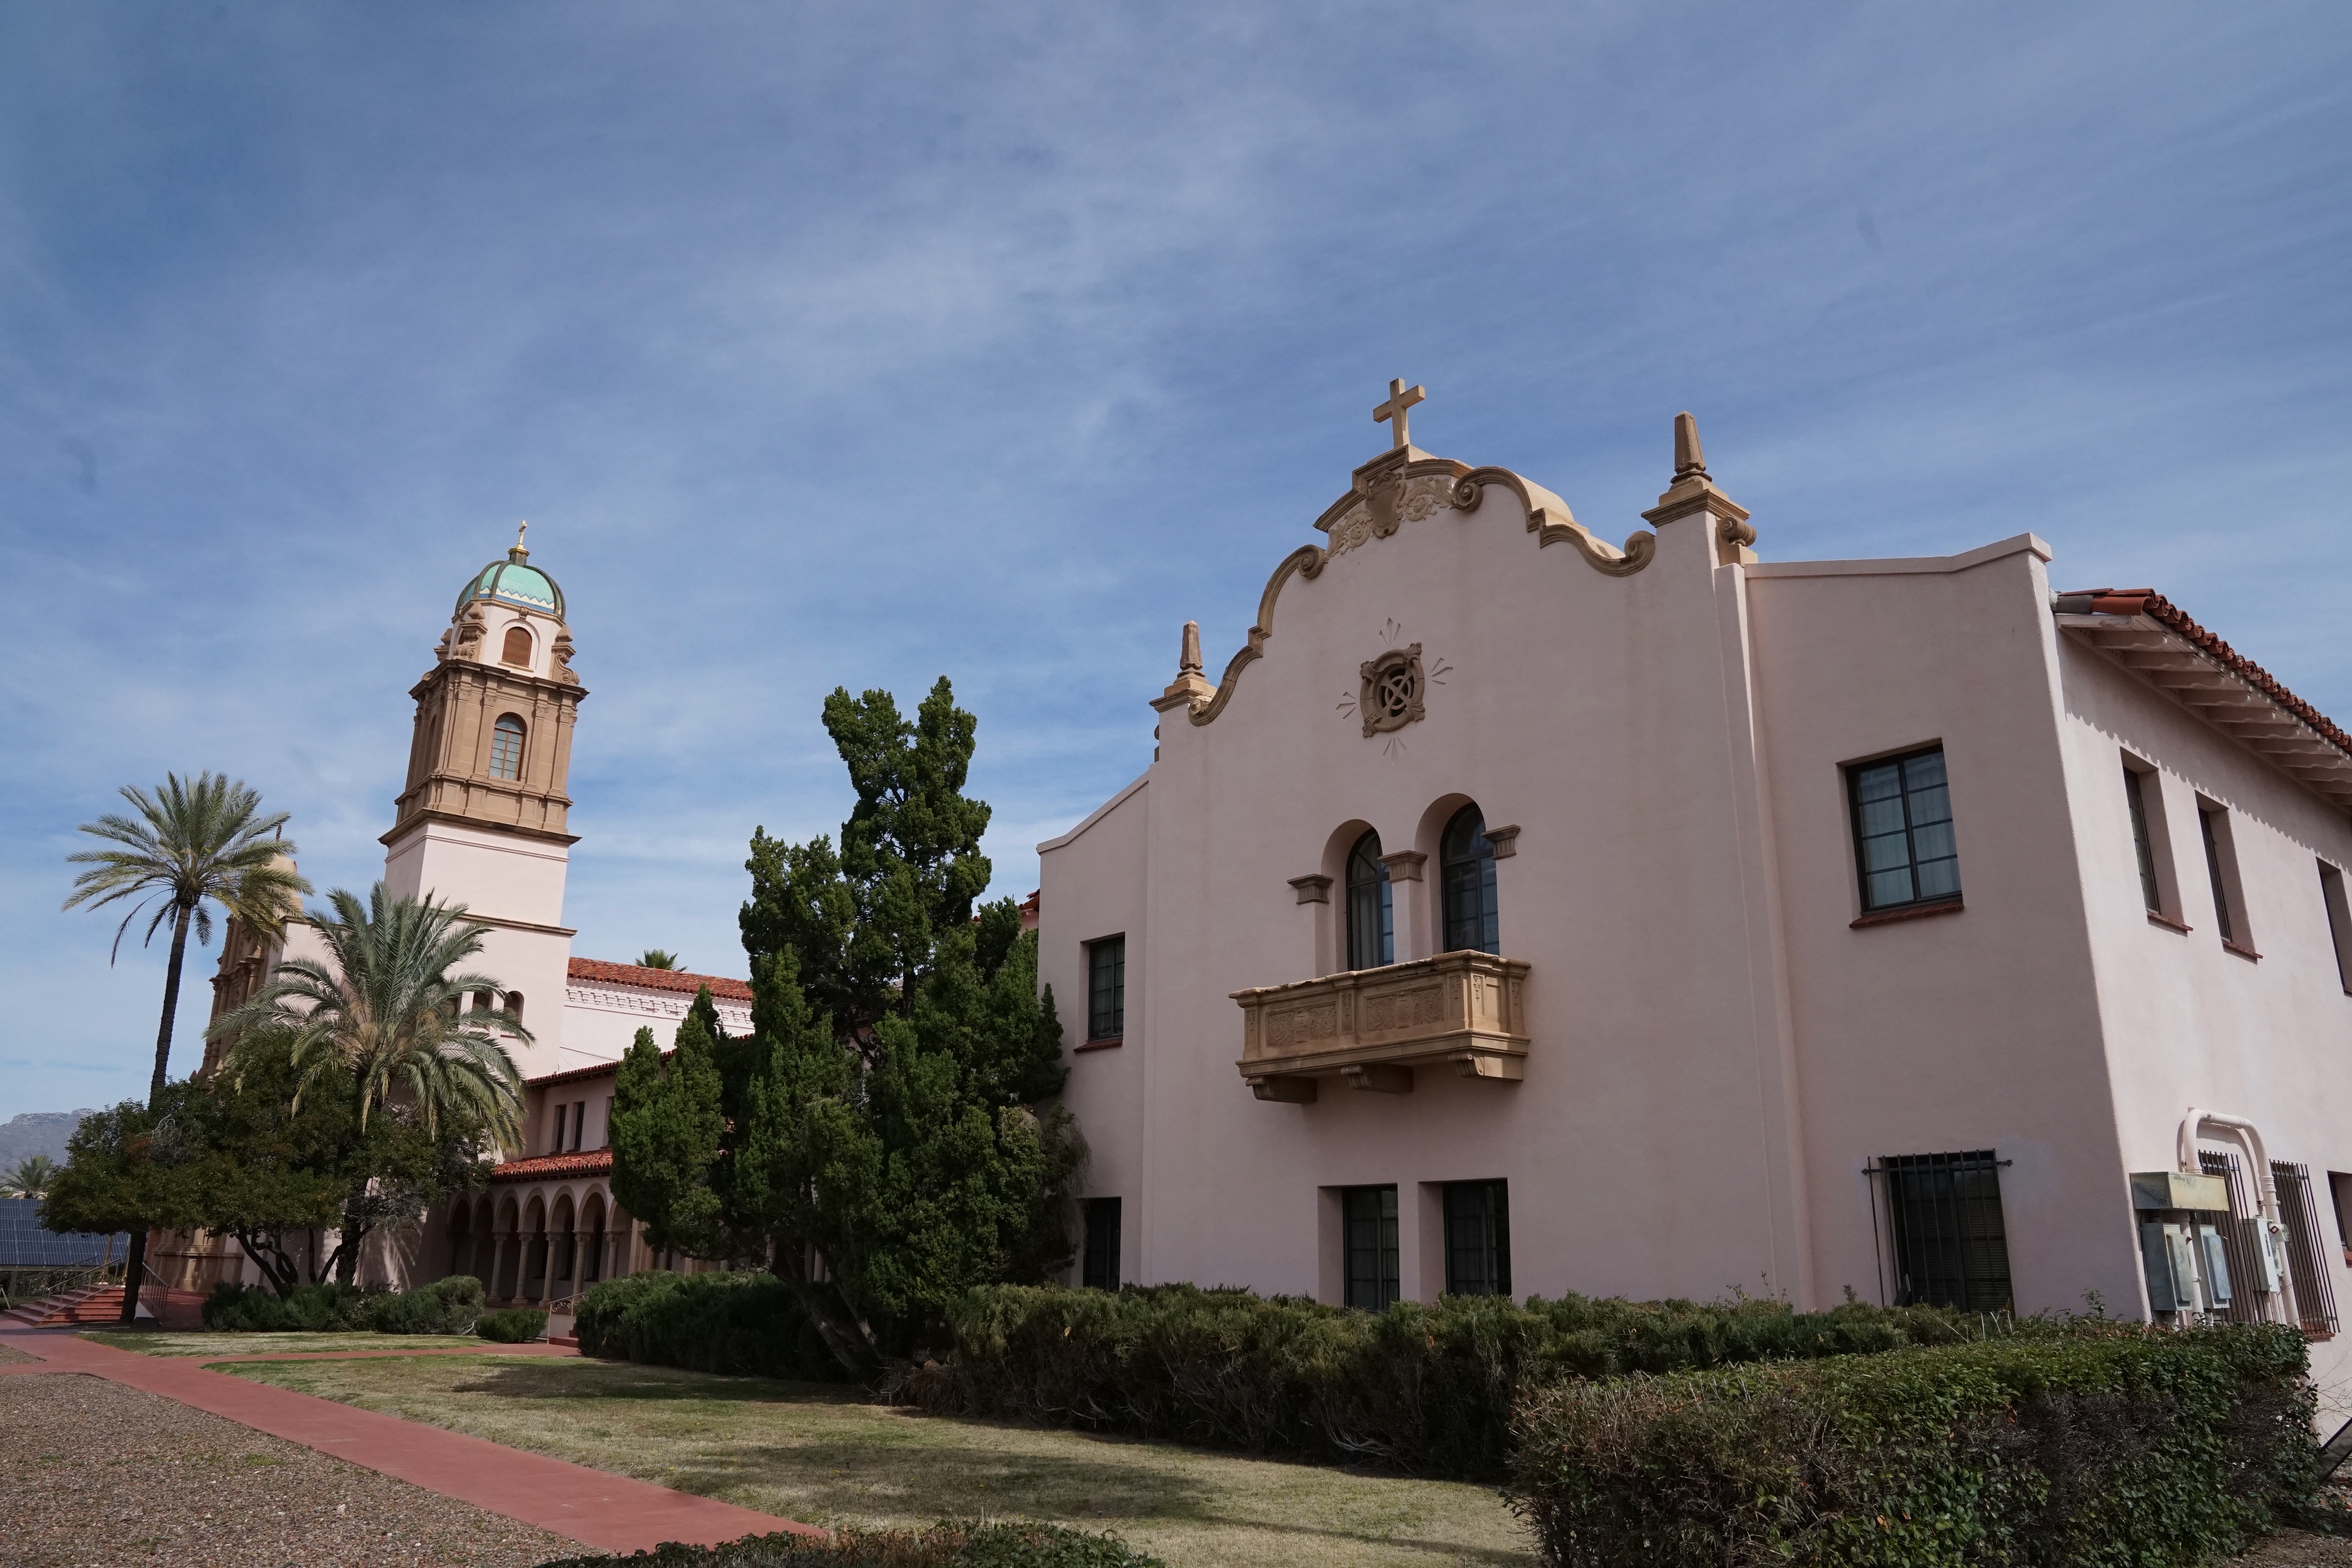 The recently reopened Benedictine monastery in Tucson, Ariz., serves as a temporary shelter for asylum seekers. (J.D. Long-García)